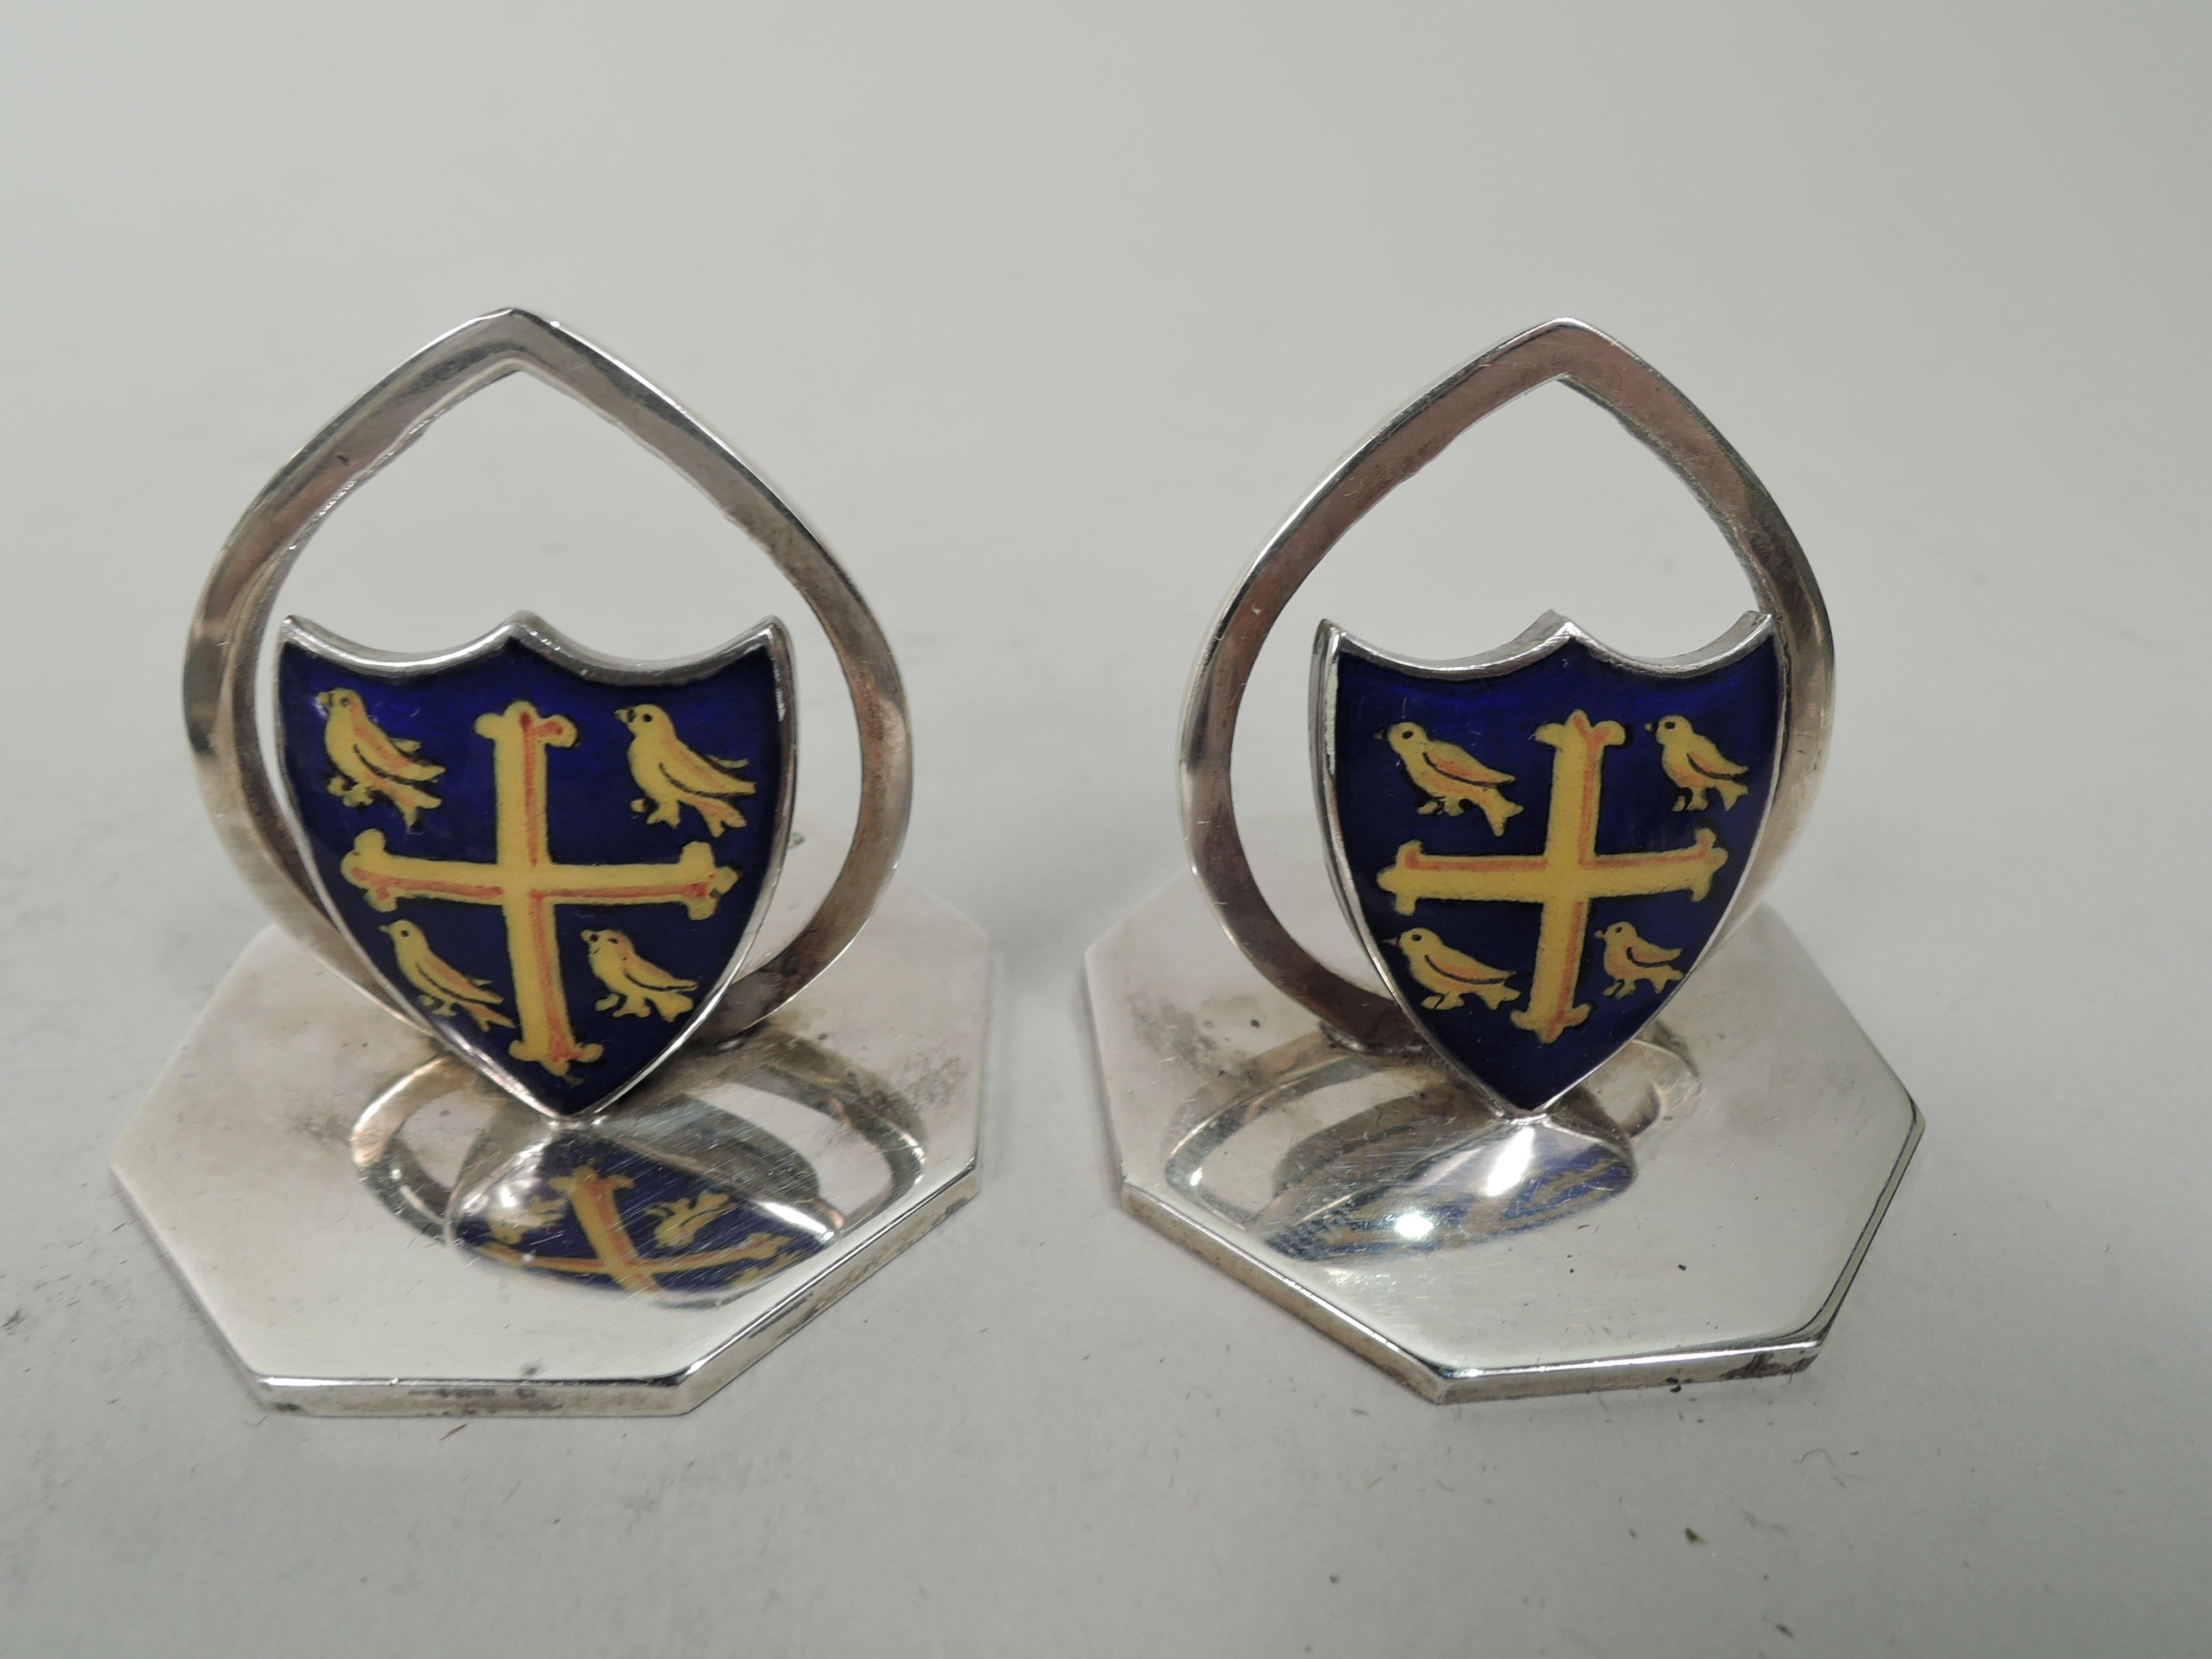 Set of 4 Edwardian sterling silver and enamel place card holders. Made by James William Benson in Birmingham, 1906 to 1908. Each: Enameled coat of arms and open oval clip mounted to flat octagonal base. Same design comprising yellow cross and birds